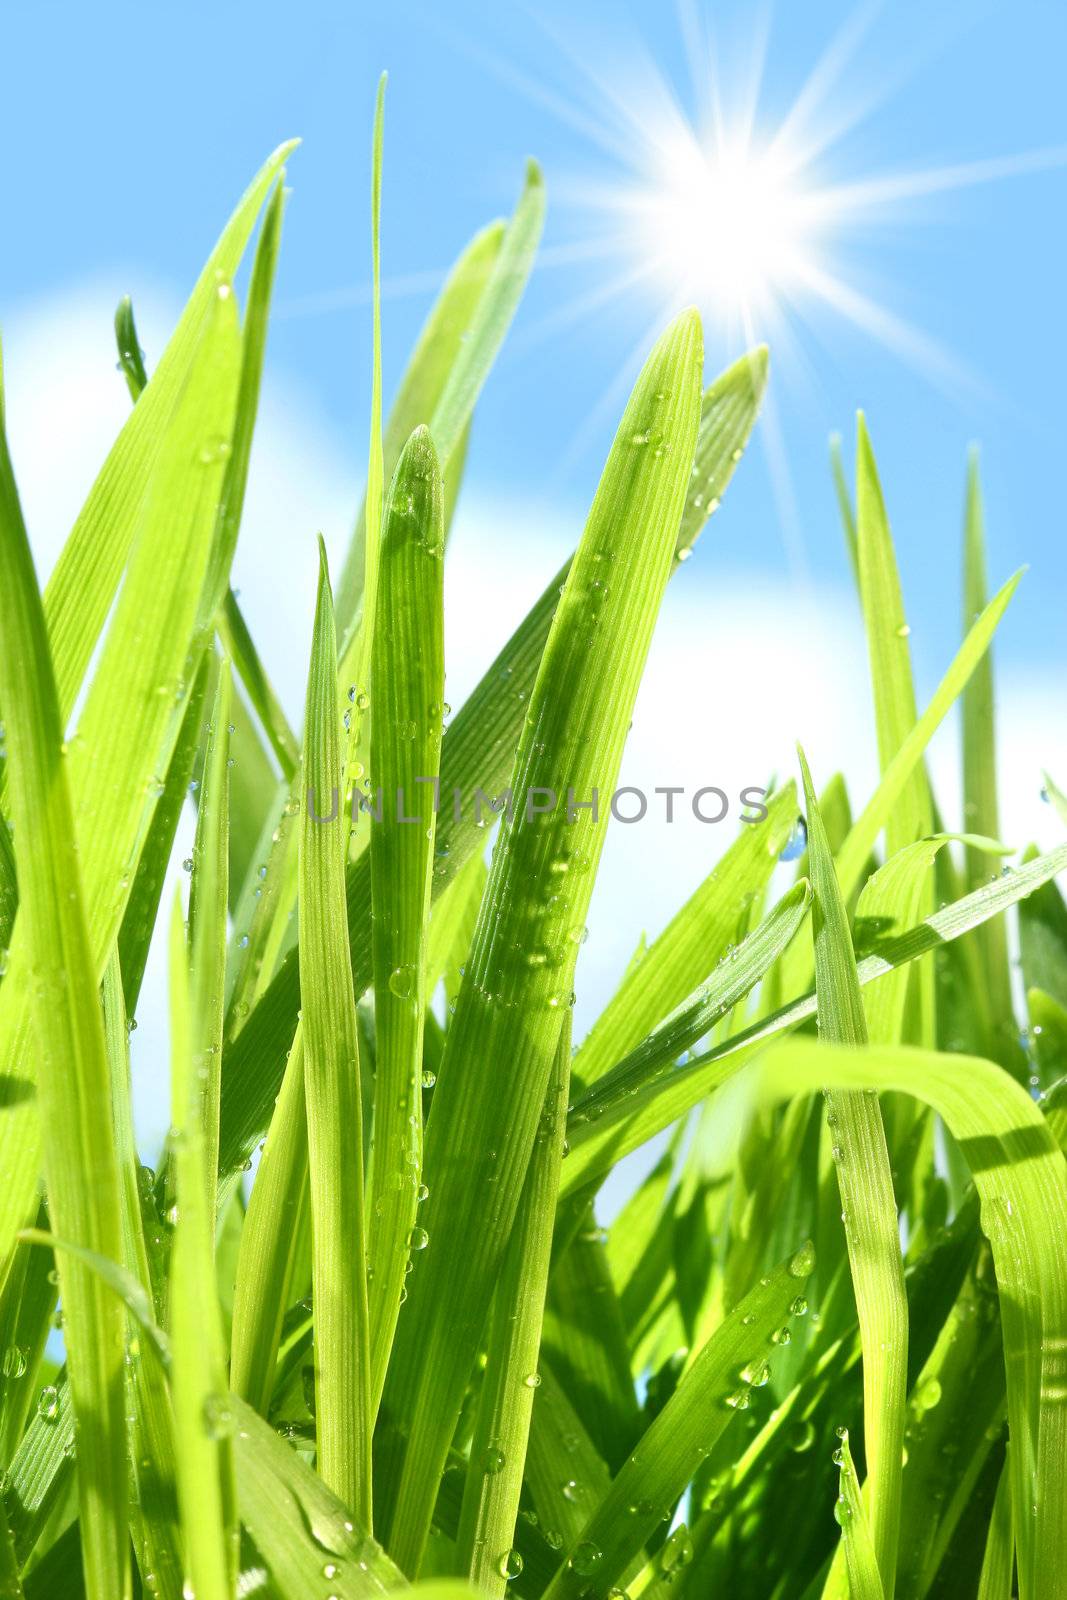 Tall grass growing against blue sky by Sandralise